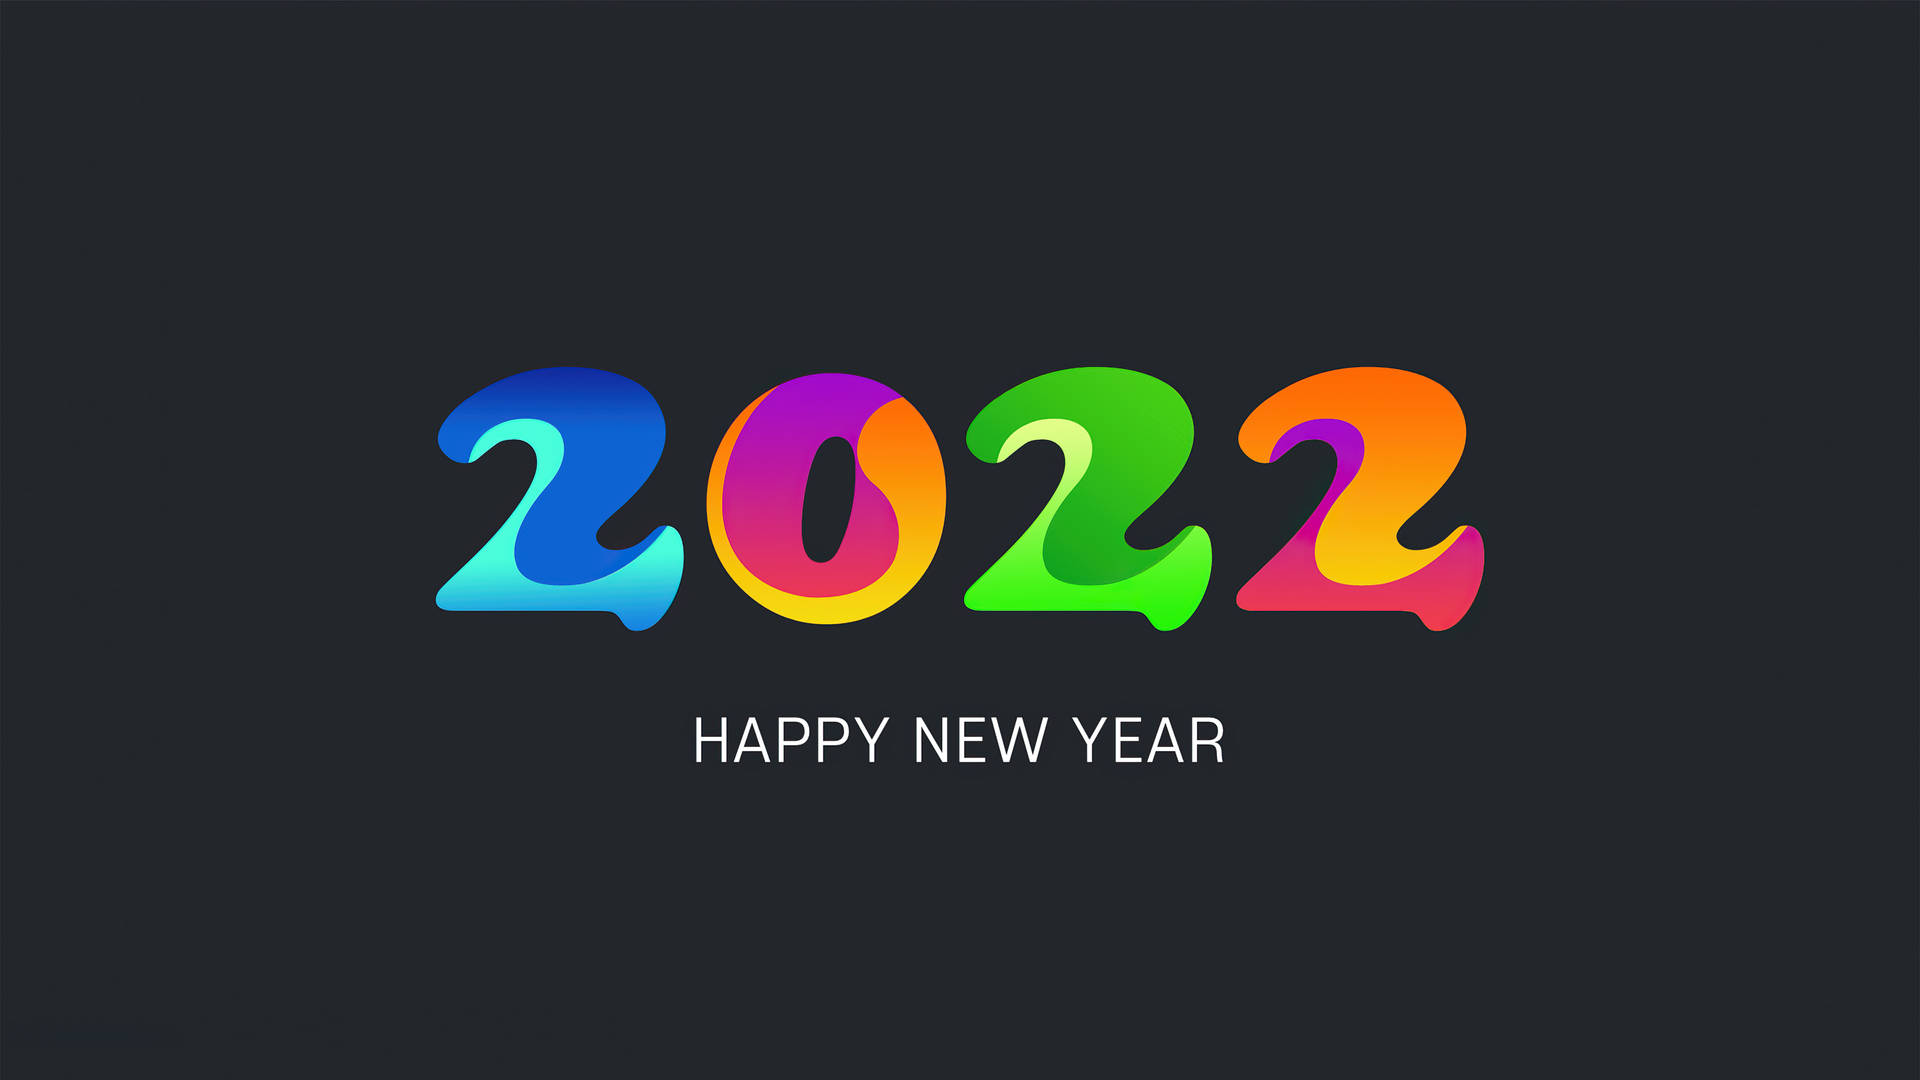 Happy New Year 2022 Colorful Neon Art